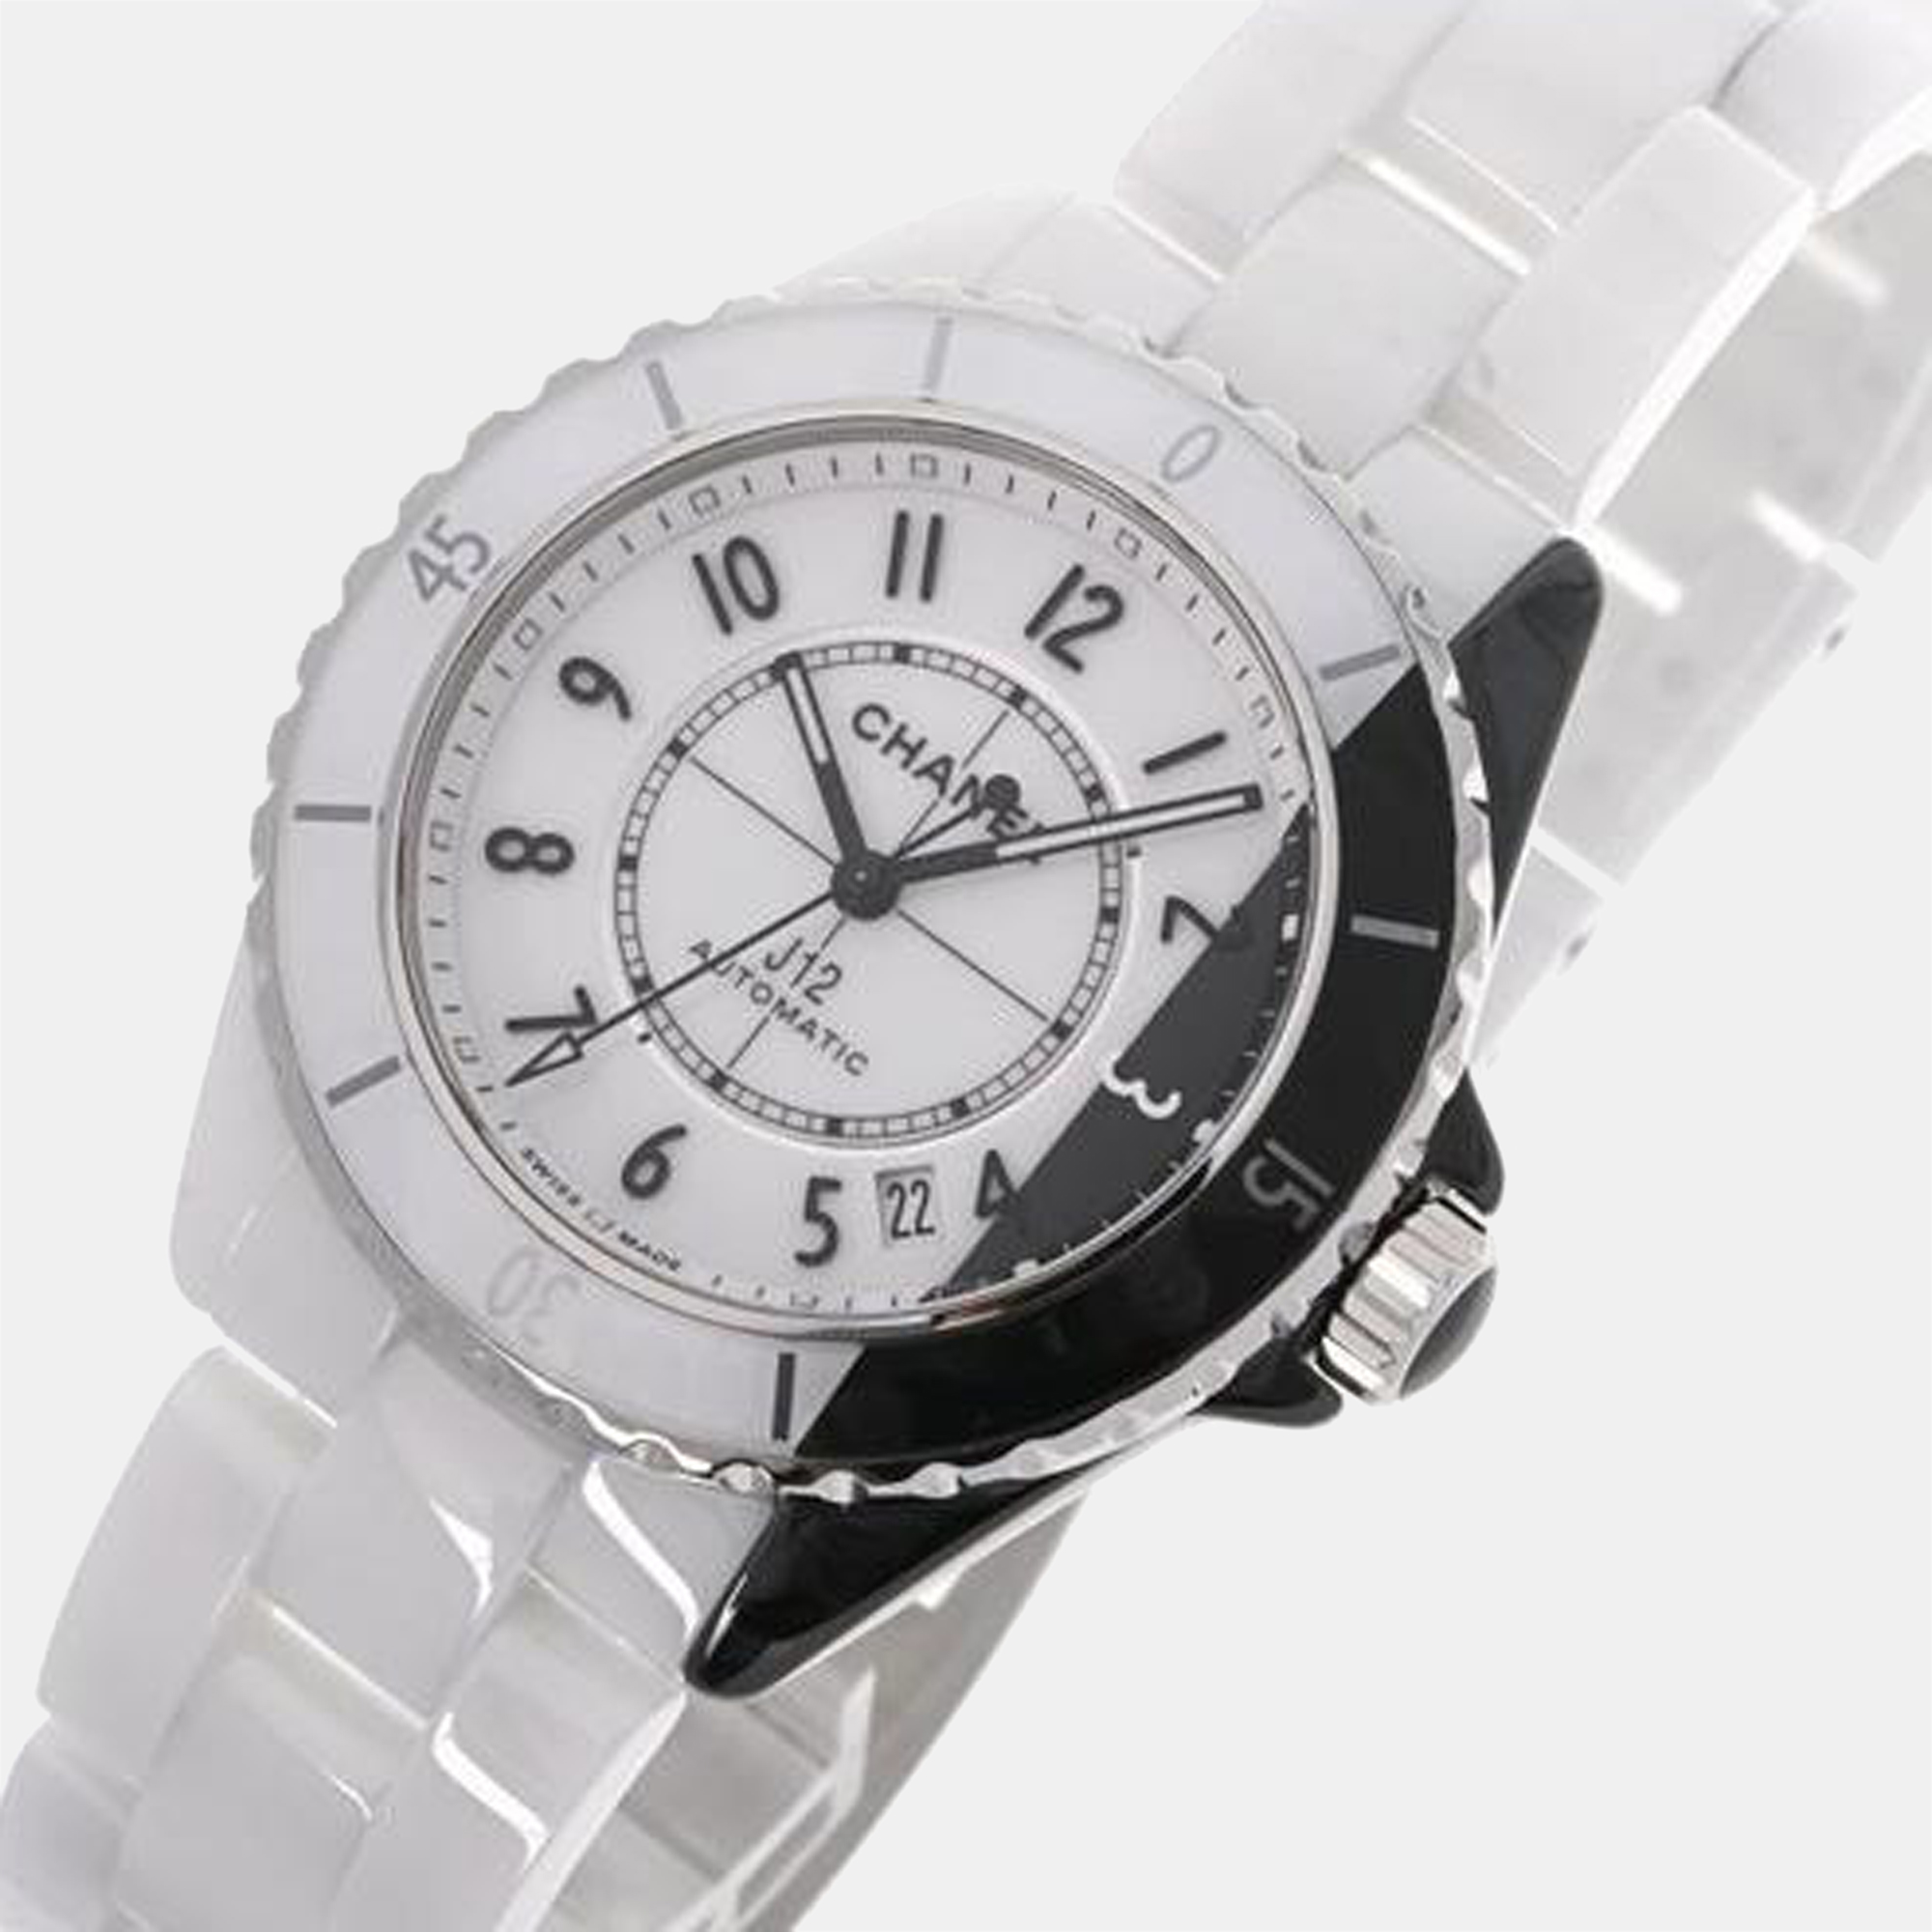 

Chanel White Stainless Steel And Ceramic J12 H6515 Automatic Men's Wristwatch 38 mm